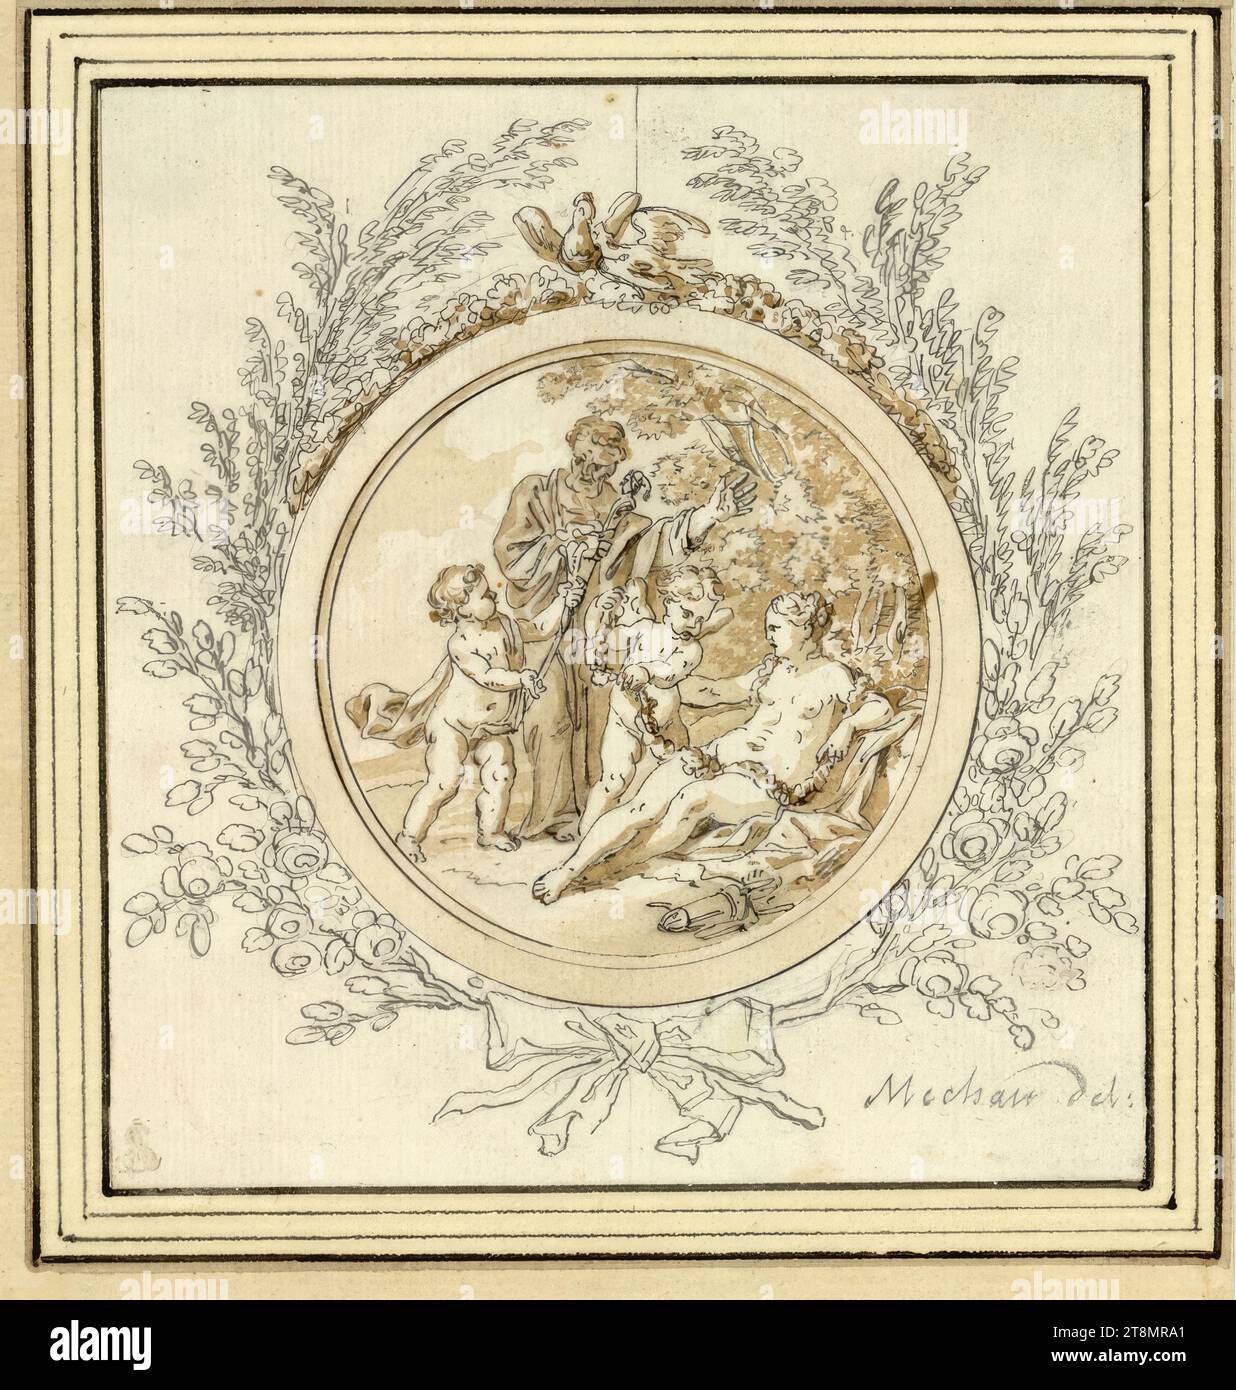 Greeting card for the wedding (Venus and Cupid, Momus and another putto), Jacob Wilhelm Mechau (Leipzig 1745 - 1808 Dresden), 2nd half of the 18th century, drawing, pen in gray and black, brush in brown, washed, over pencil, 12.5 x 11.7 cm, l.l. Duke Albert of Saxe-Teschen Stock Photo